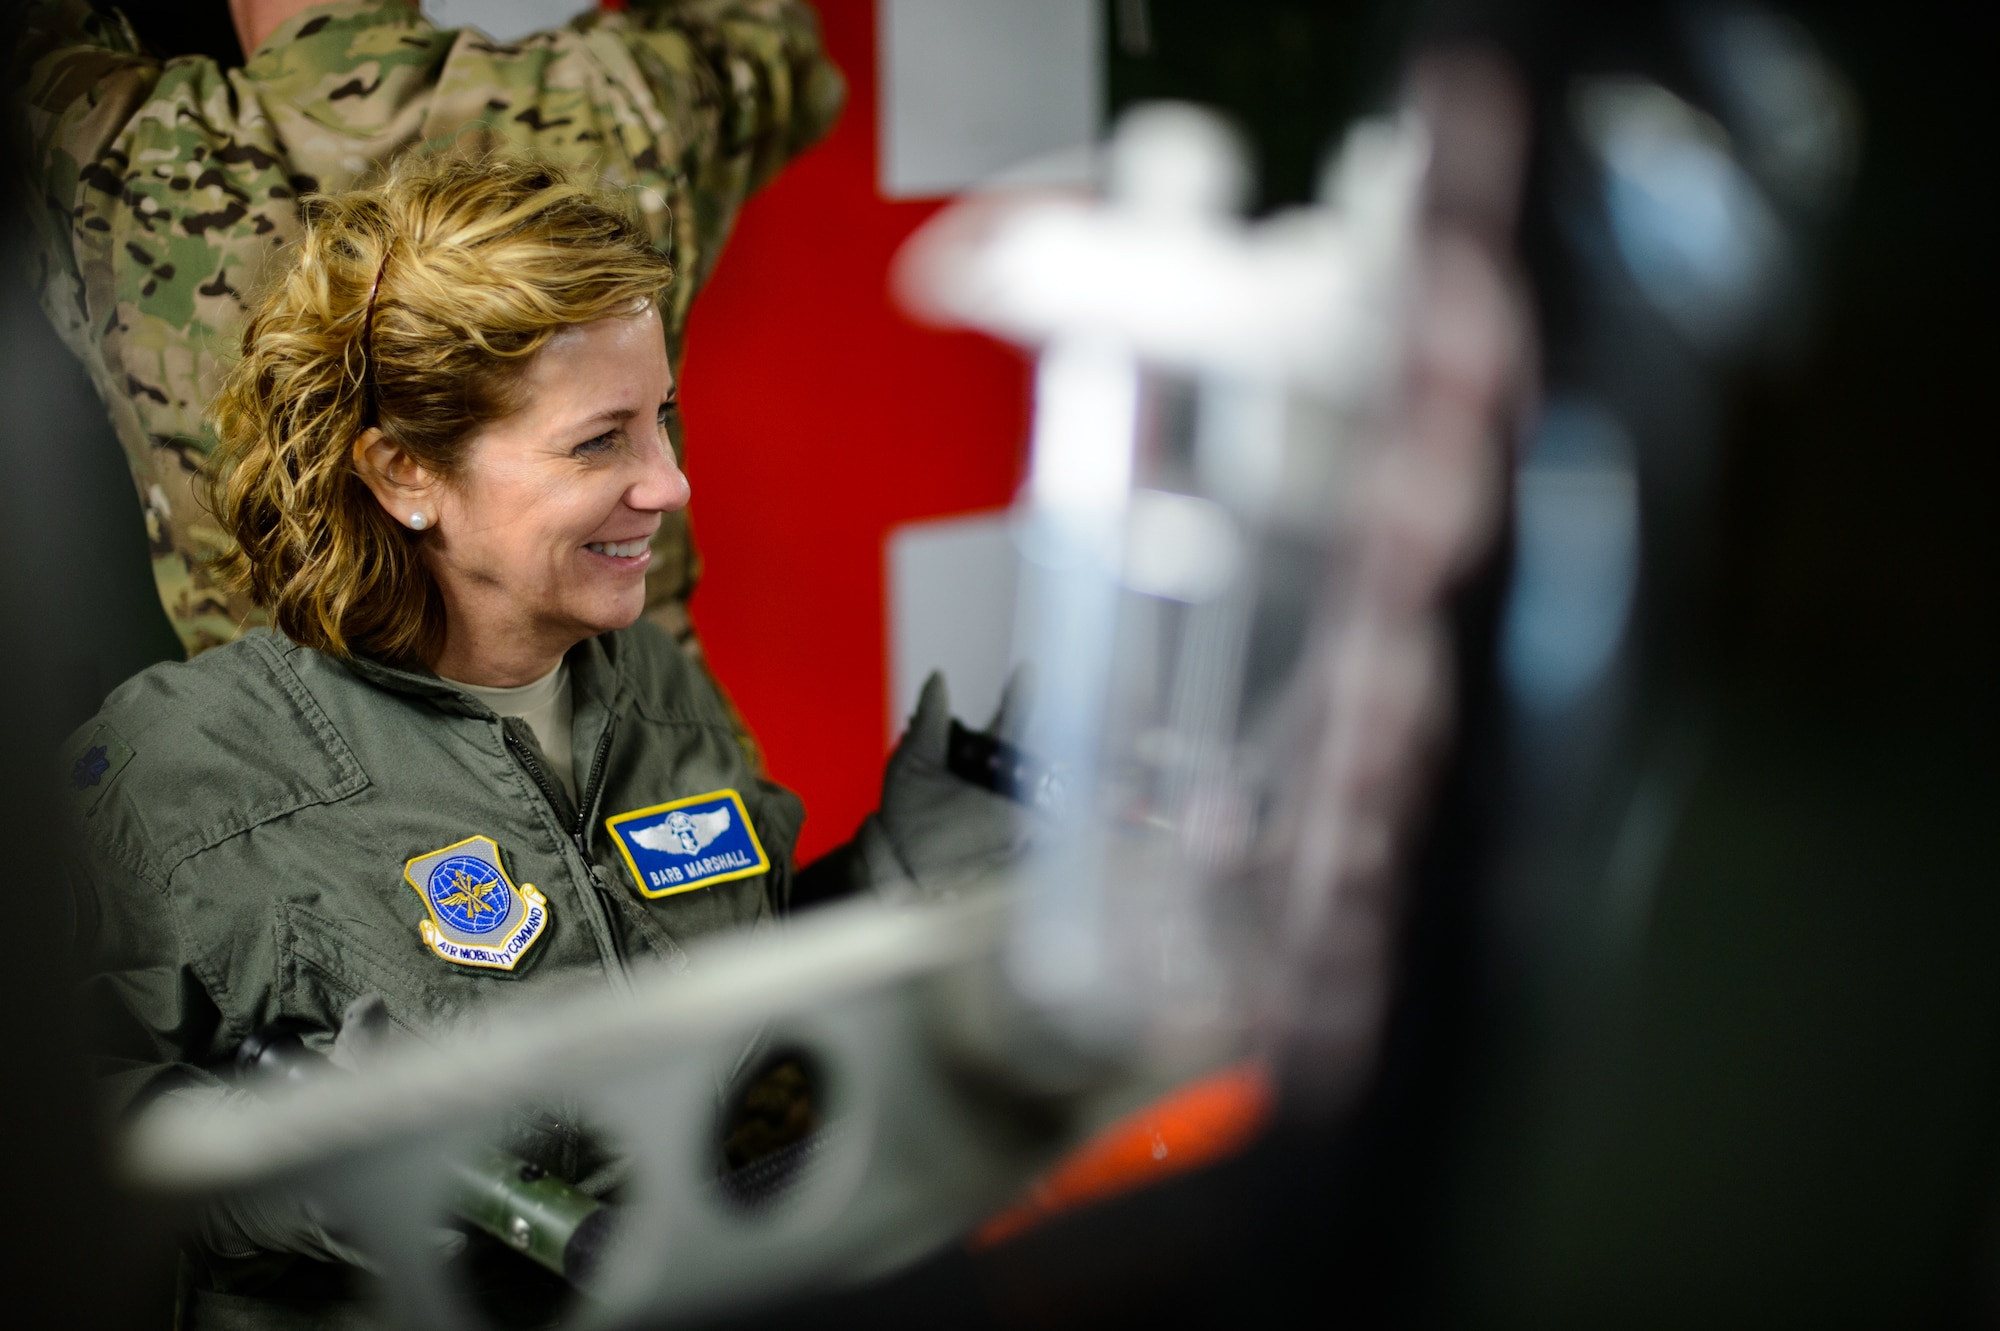 Lt. Col. Barb Marshall, 10th Expeditionary Aeromedical Evacuation Flight chief nurse, carries a litter in preparation for an aeromedical evacuation sortie Nov. 10, 2015, at Ramstein Air Base, Germany. The flying crew and other members of the 10th EAEF help set up an aircraft to ensure medical personnel took off on time. (U.S. Air Force photo/Staff Sgt. Armando A. Schwier-Morales)